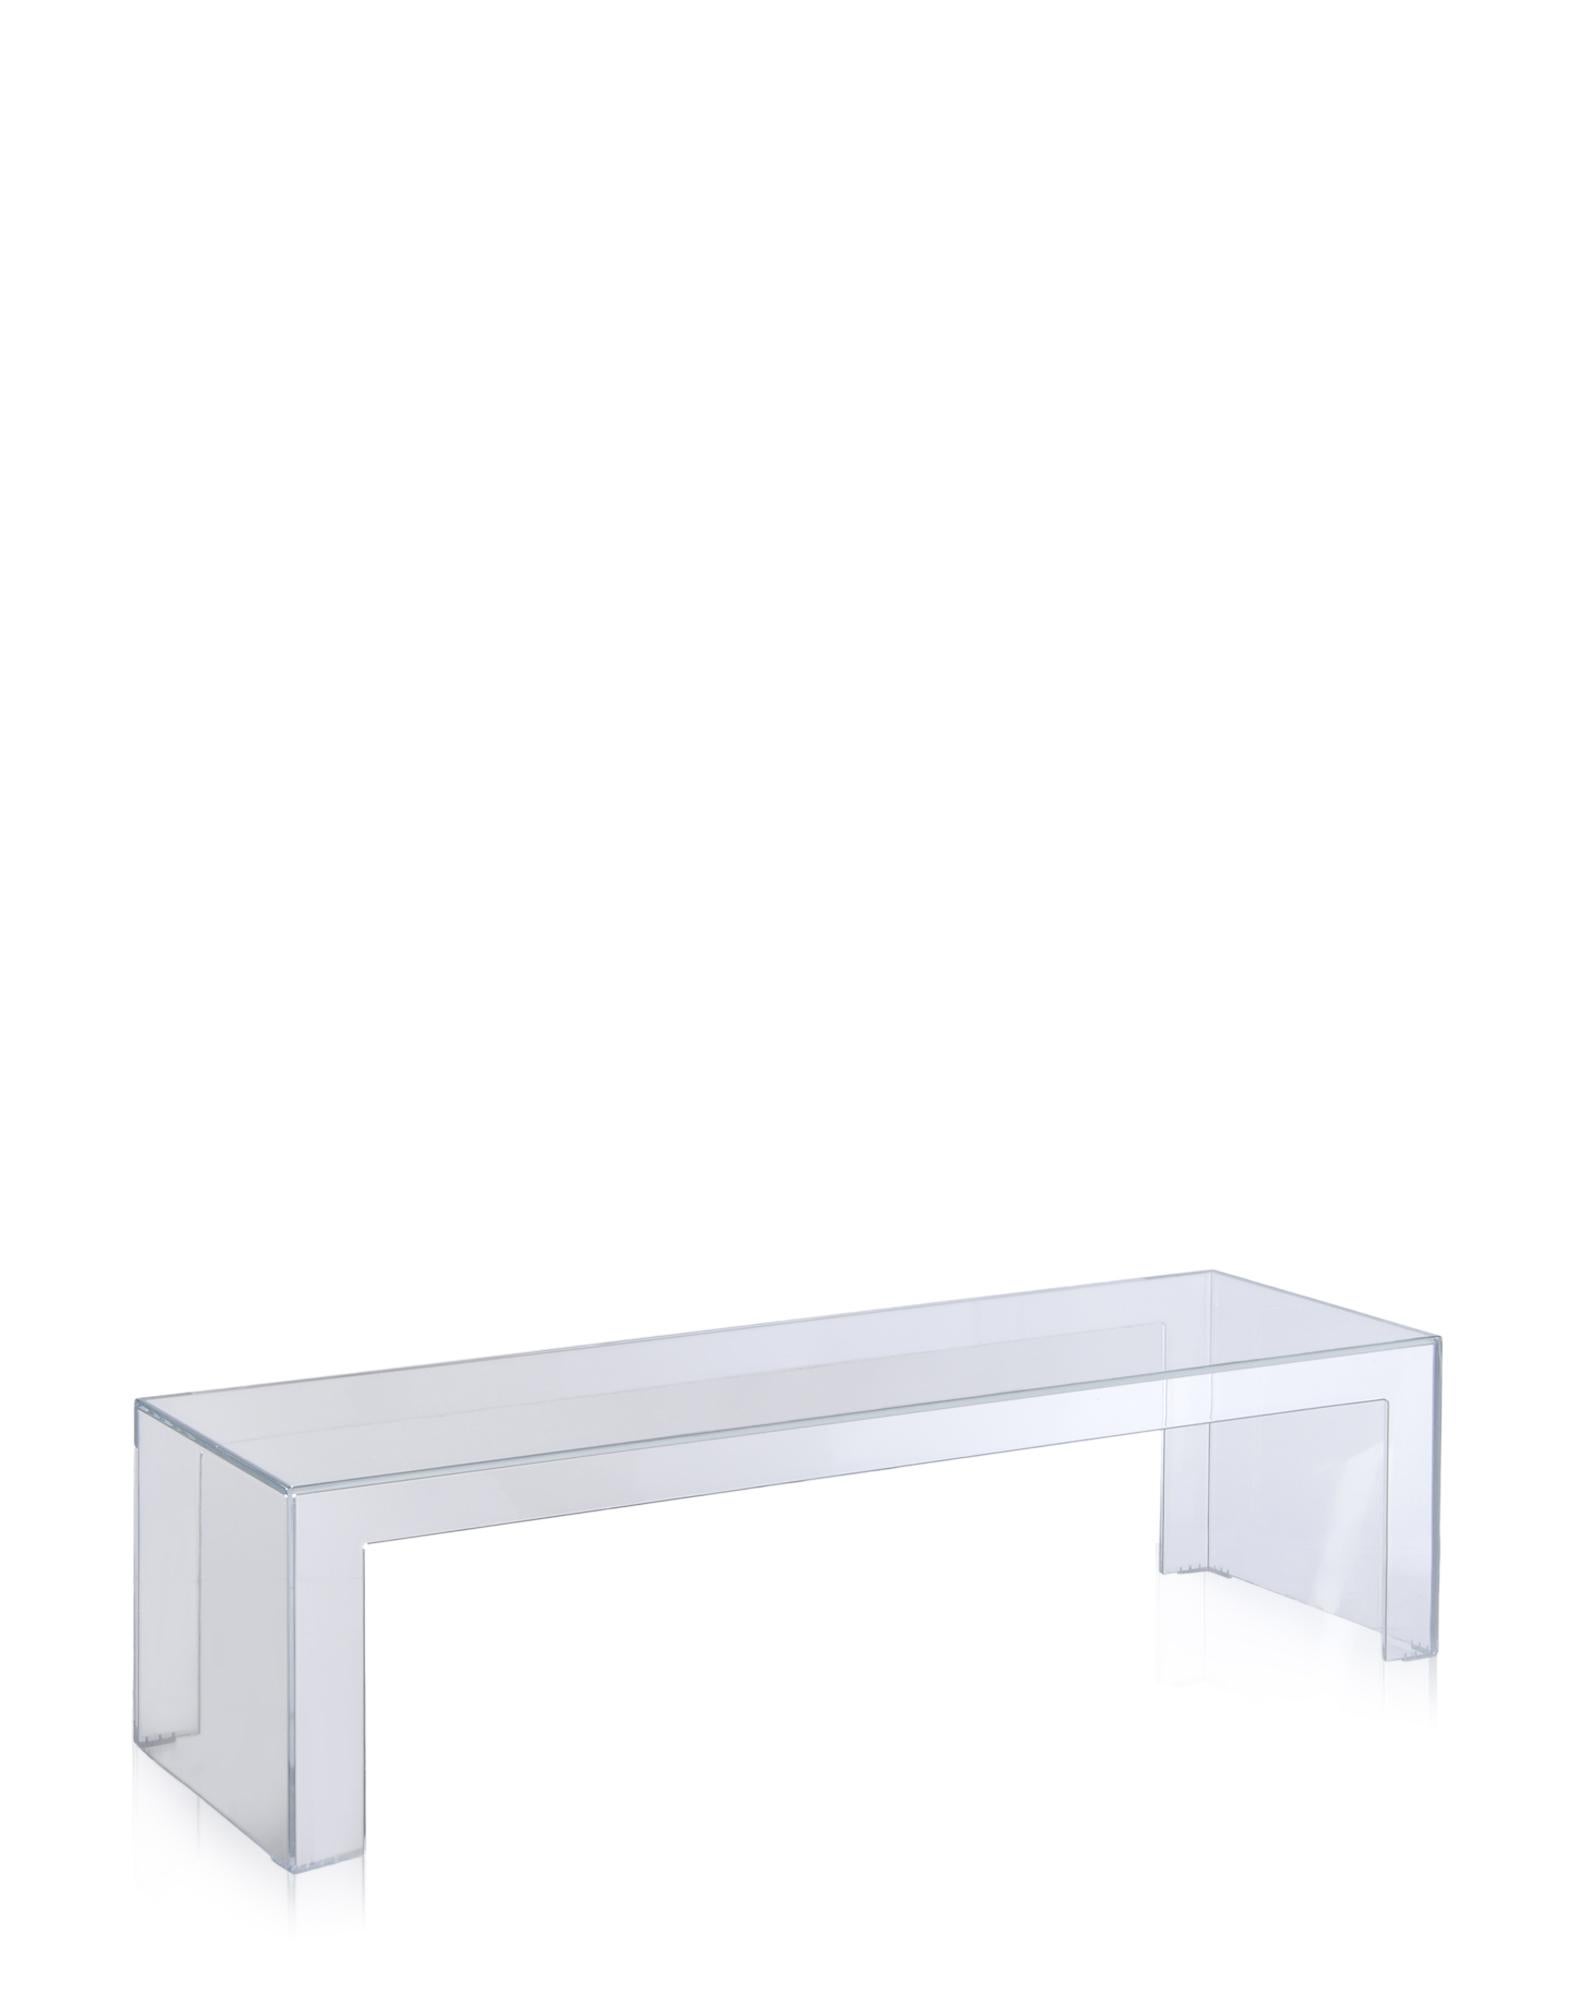 Invisible table designed by Tokujin Yoshioka combines lightness and solidity, grace and elegance and practicality and style. Its simplicity and purity of form makes it adaptable to any environment. Its sophisticated palette of colors ranging from